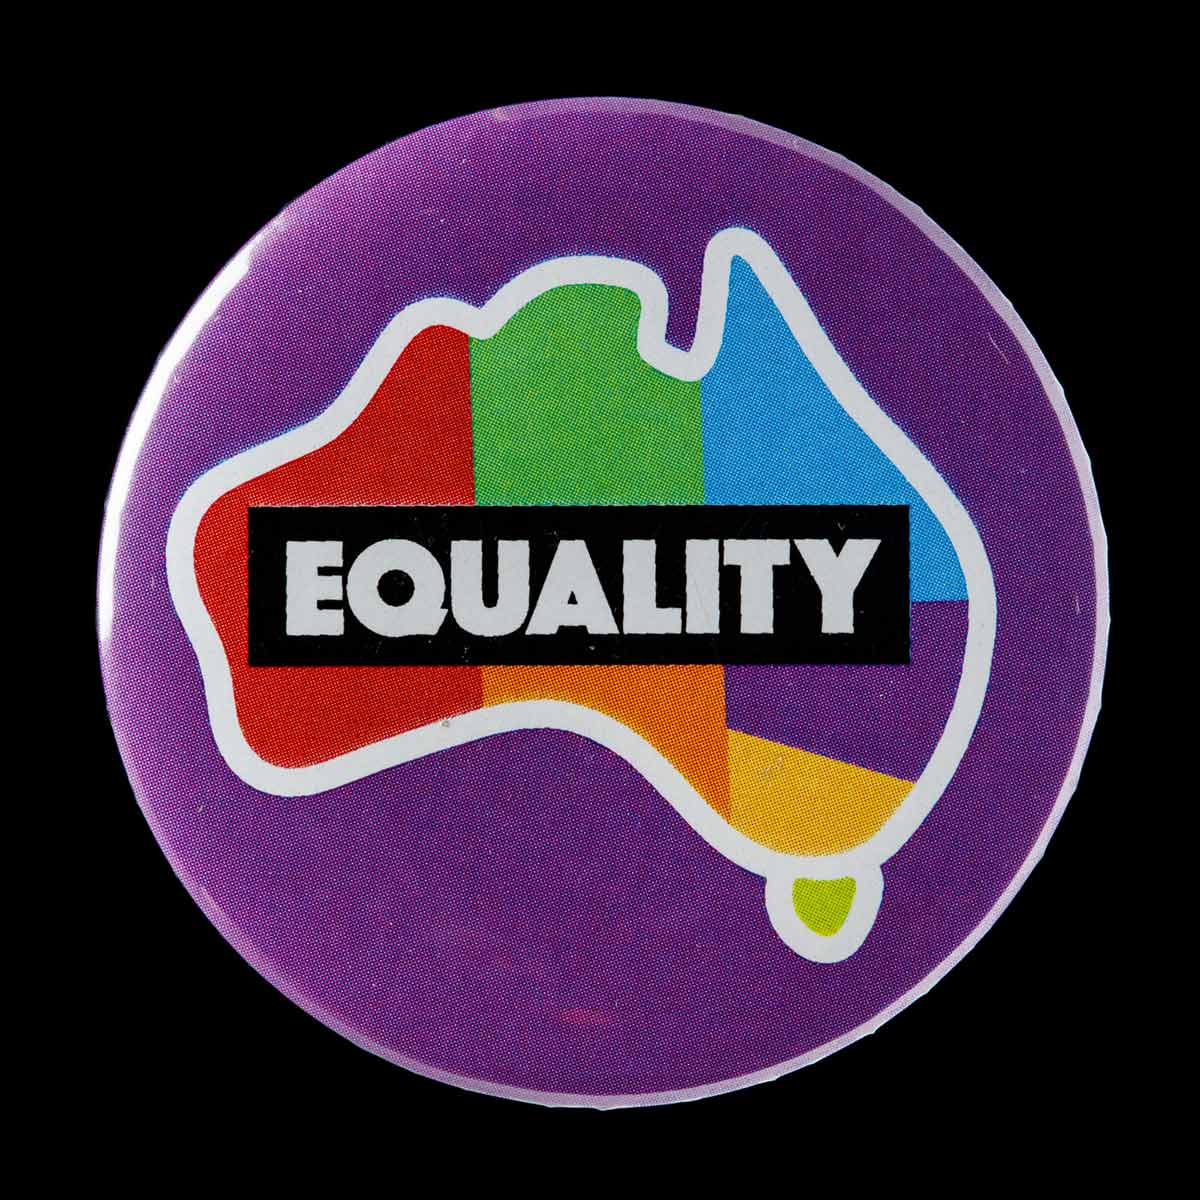 A round badge with a purple background. It features a map of Australia with each state and territory depicted in a different colour. The word 'EQUALITY' features centrally on the badge.